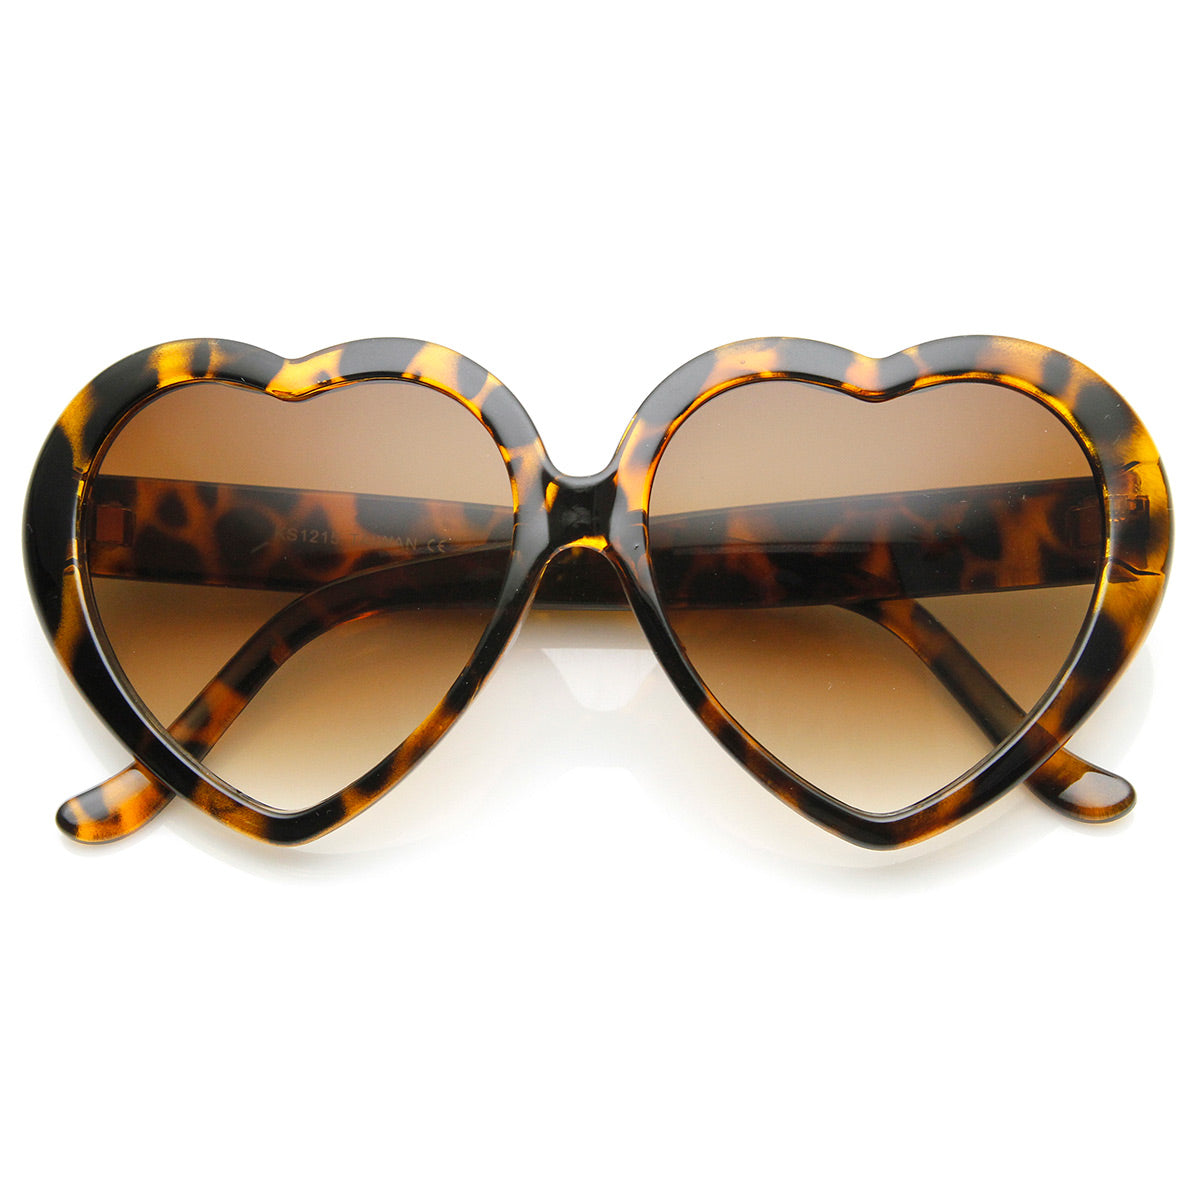 Fun, Oversized Heart Shaped Sunglasses with Metal Details for Women / 88568  Heart Throb